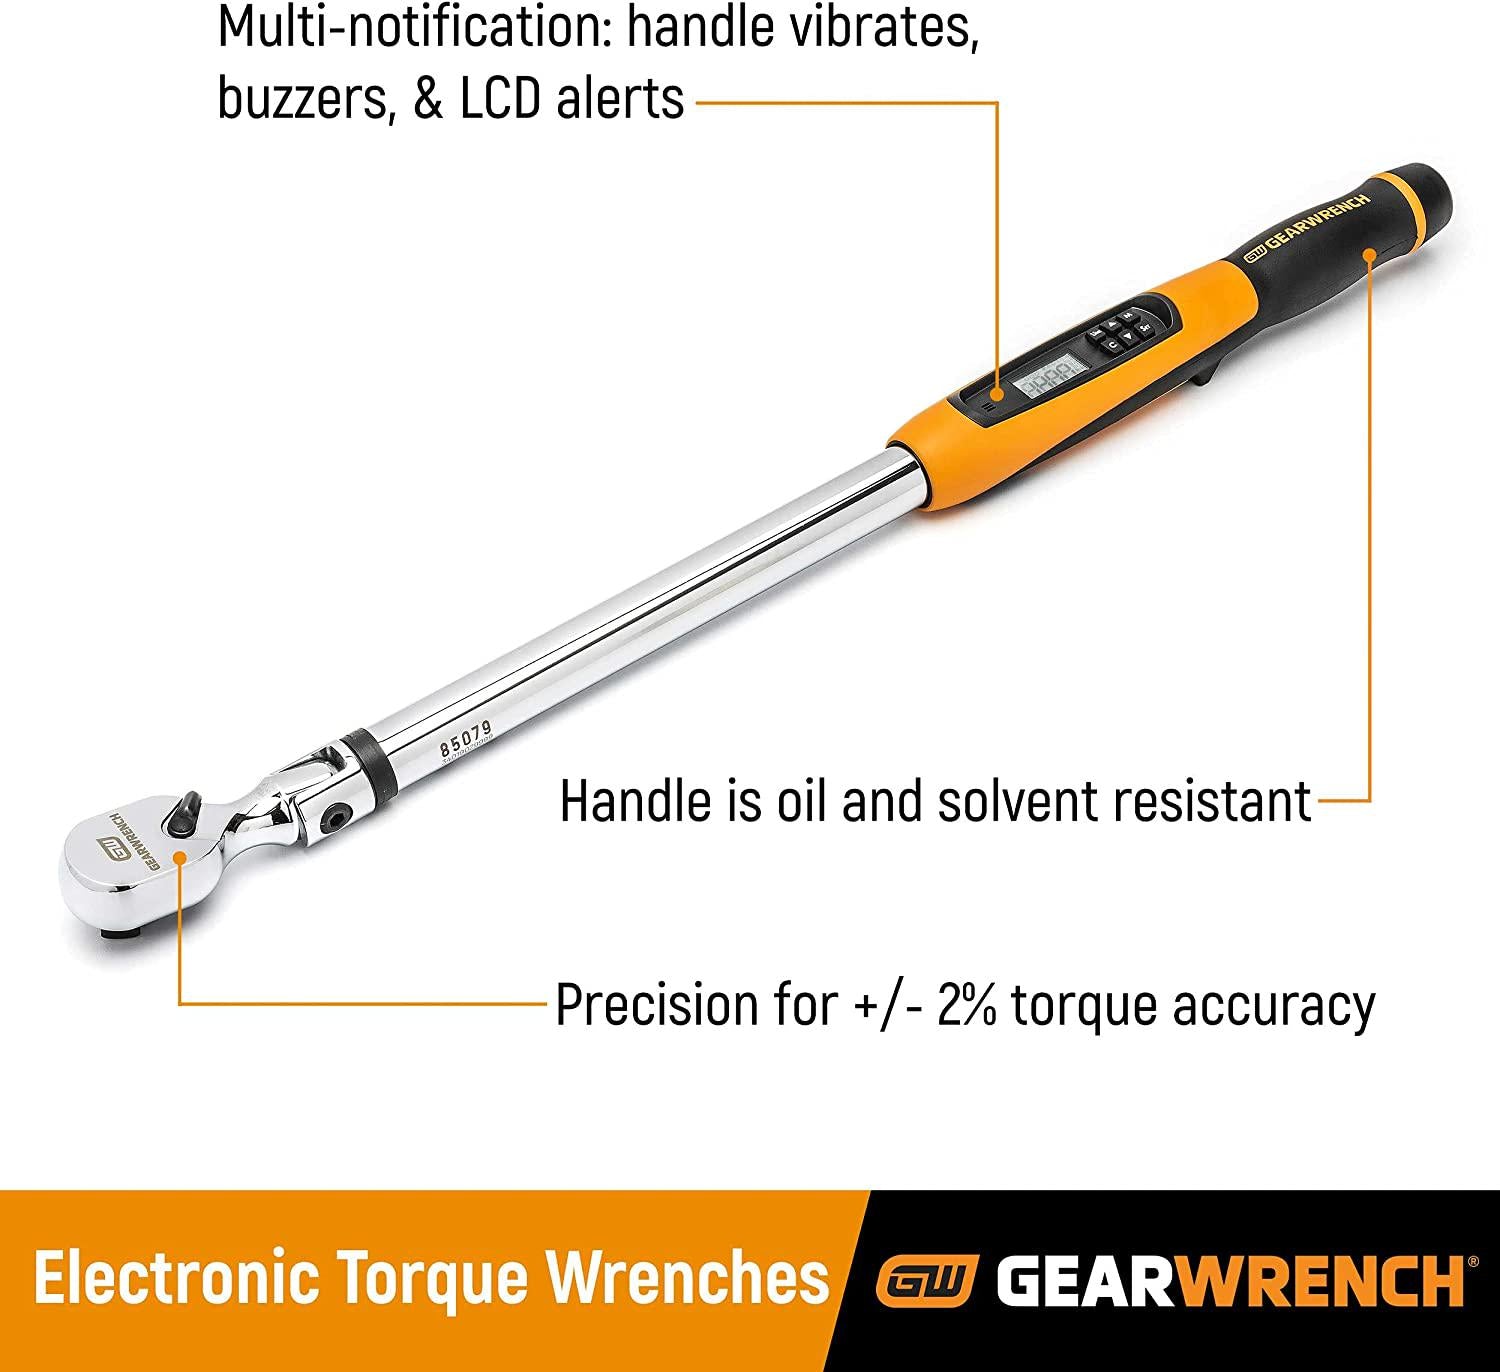 GEARWRENCH, GEARWRENCH 1/2inch Drive Electronic Torque Wrench, 30-340 Nm - 85077